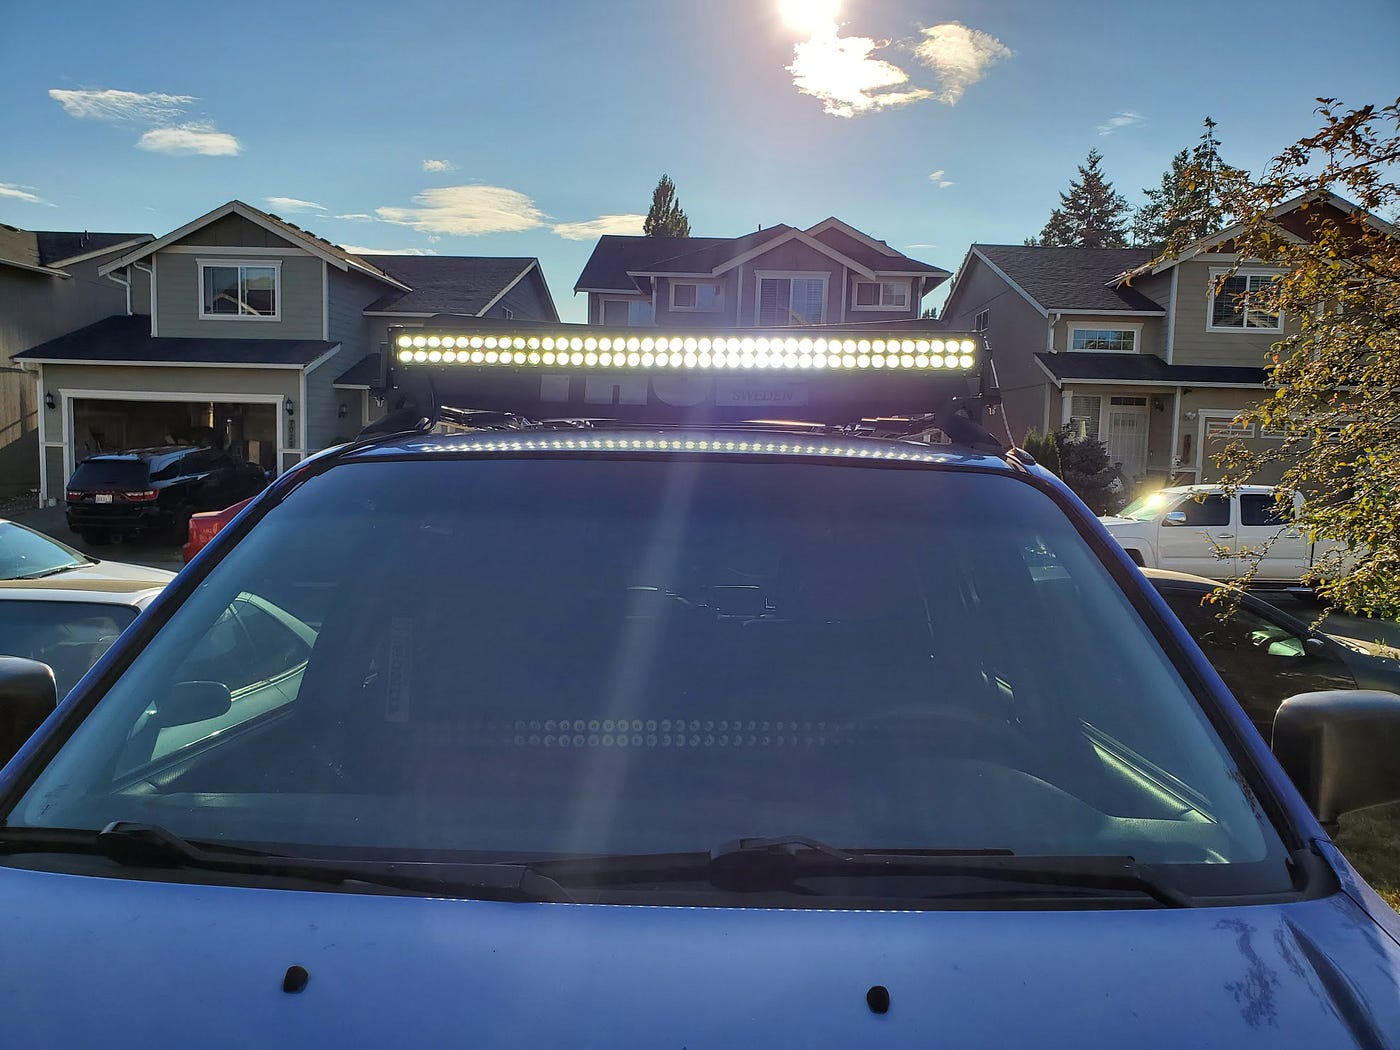 How to Install an LED Light Bar on a Vehicle, by Joel Guerra